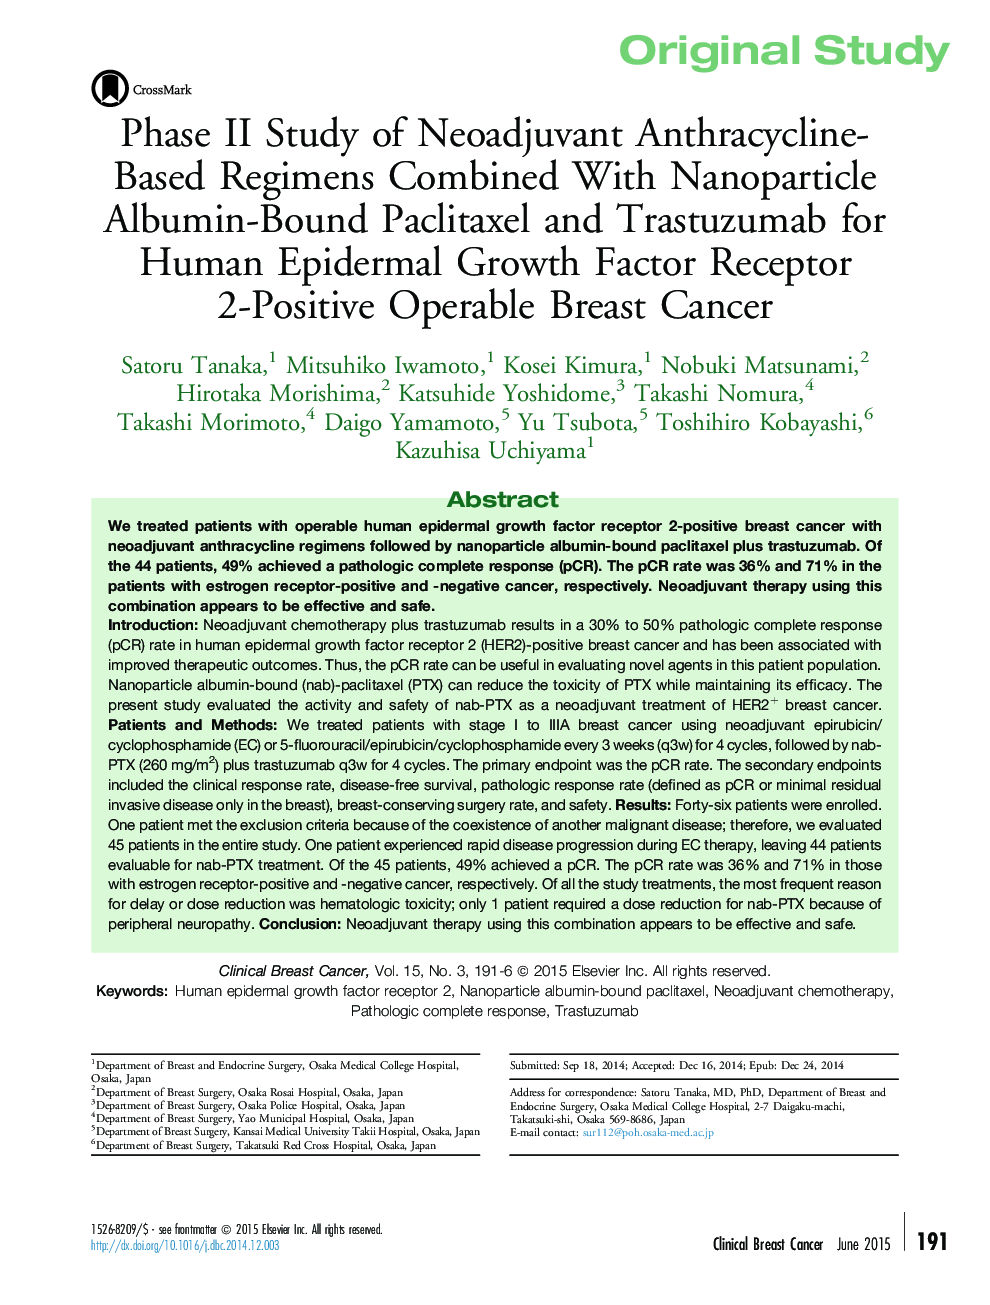 Phase II Study of Neoadjuvant Anthracycline-Based Regimens Combined With Nanoparticle Albumin-Bound Paclitaxel and Trastuzumab for Human Epidermal Growth Factor Receptor 2-Positive Operable Breast Cancer